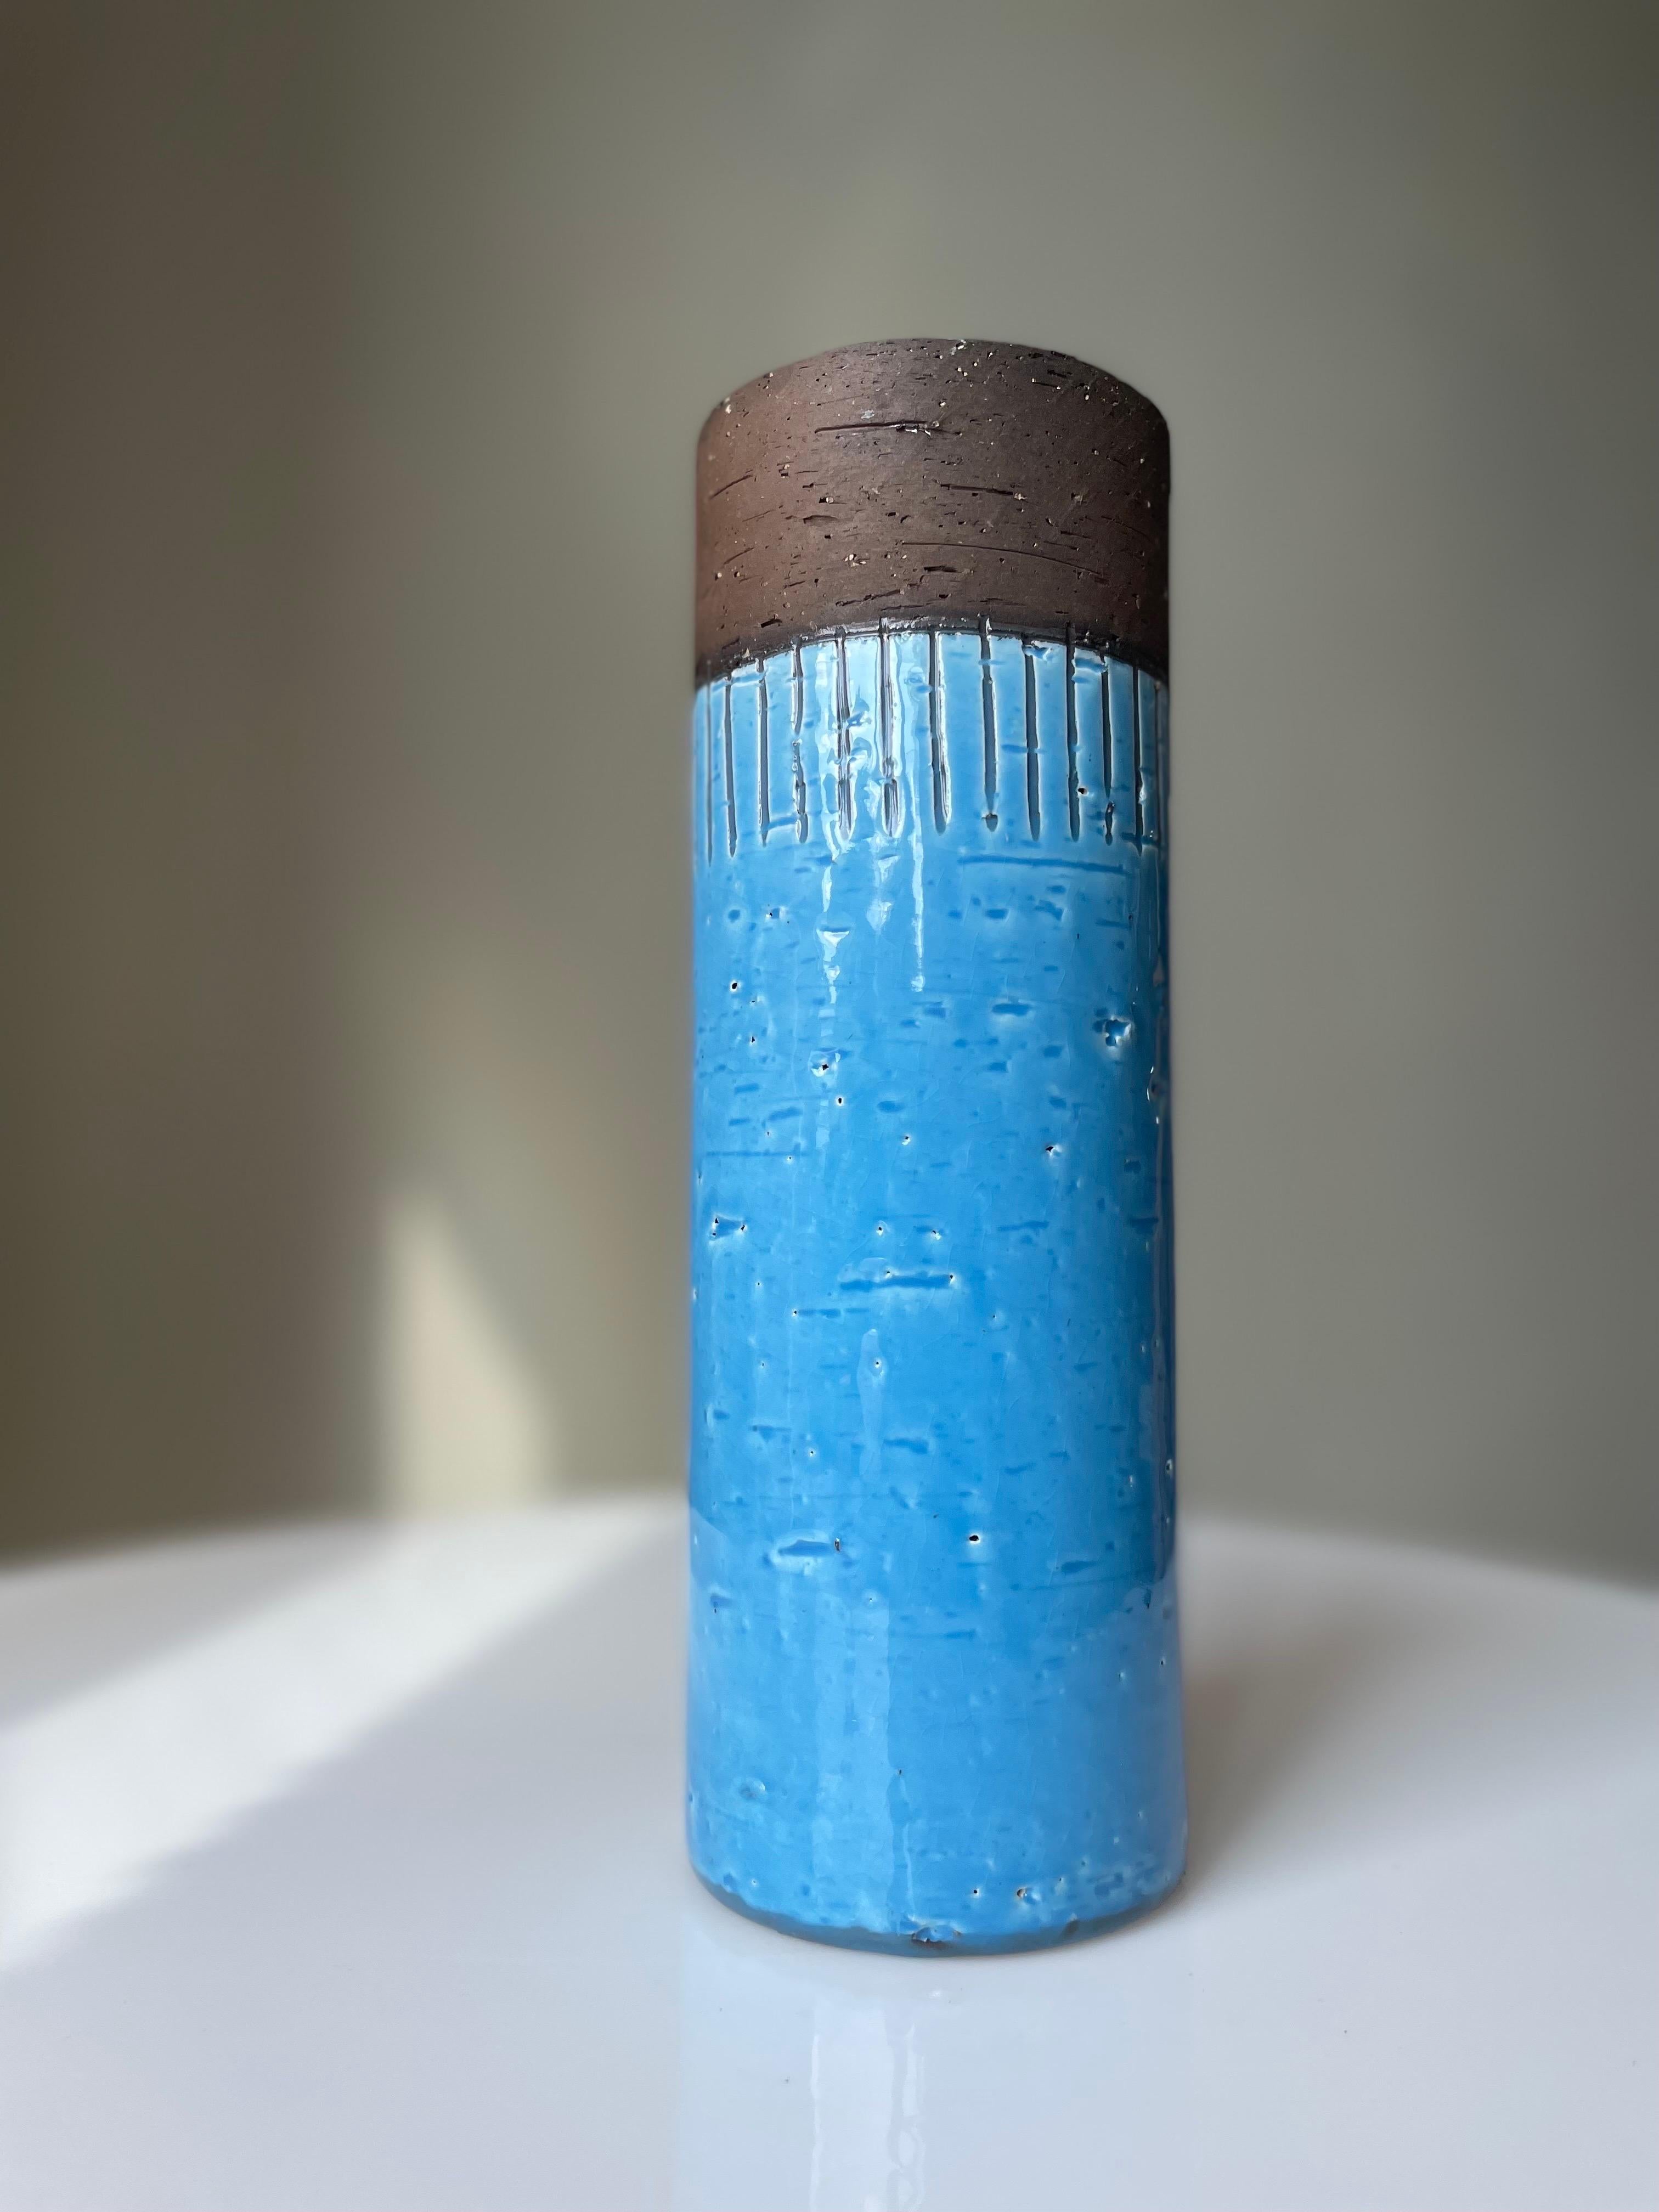 Tall handmade cylinder shaped Swedish midcentury modern ceramic vase with bright blue glaze on the outside and clear glaze on the inside. Top part left unglazed and right below are handcarved relief lines toward the shiny blue glaze. Manufactured by